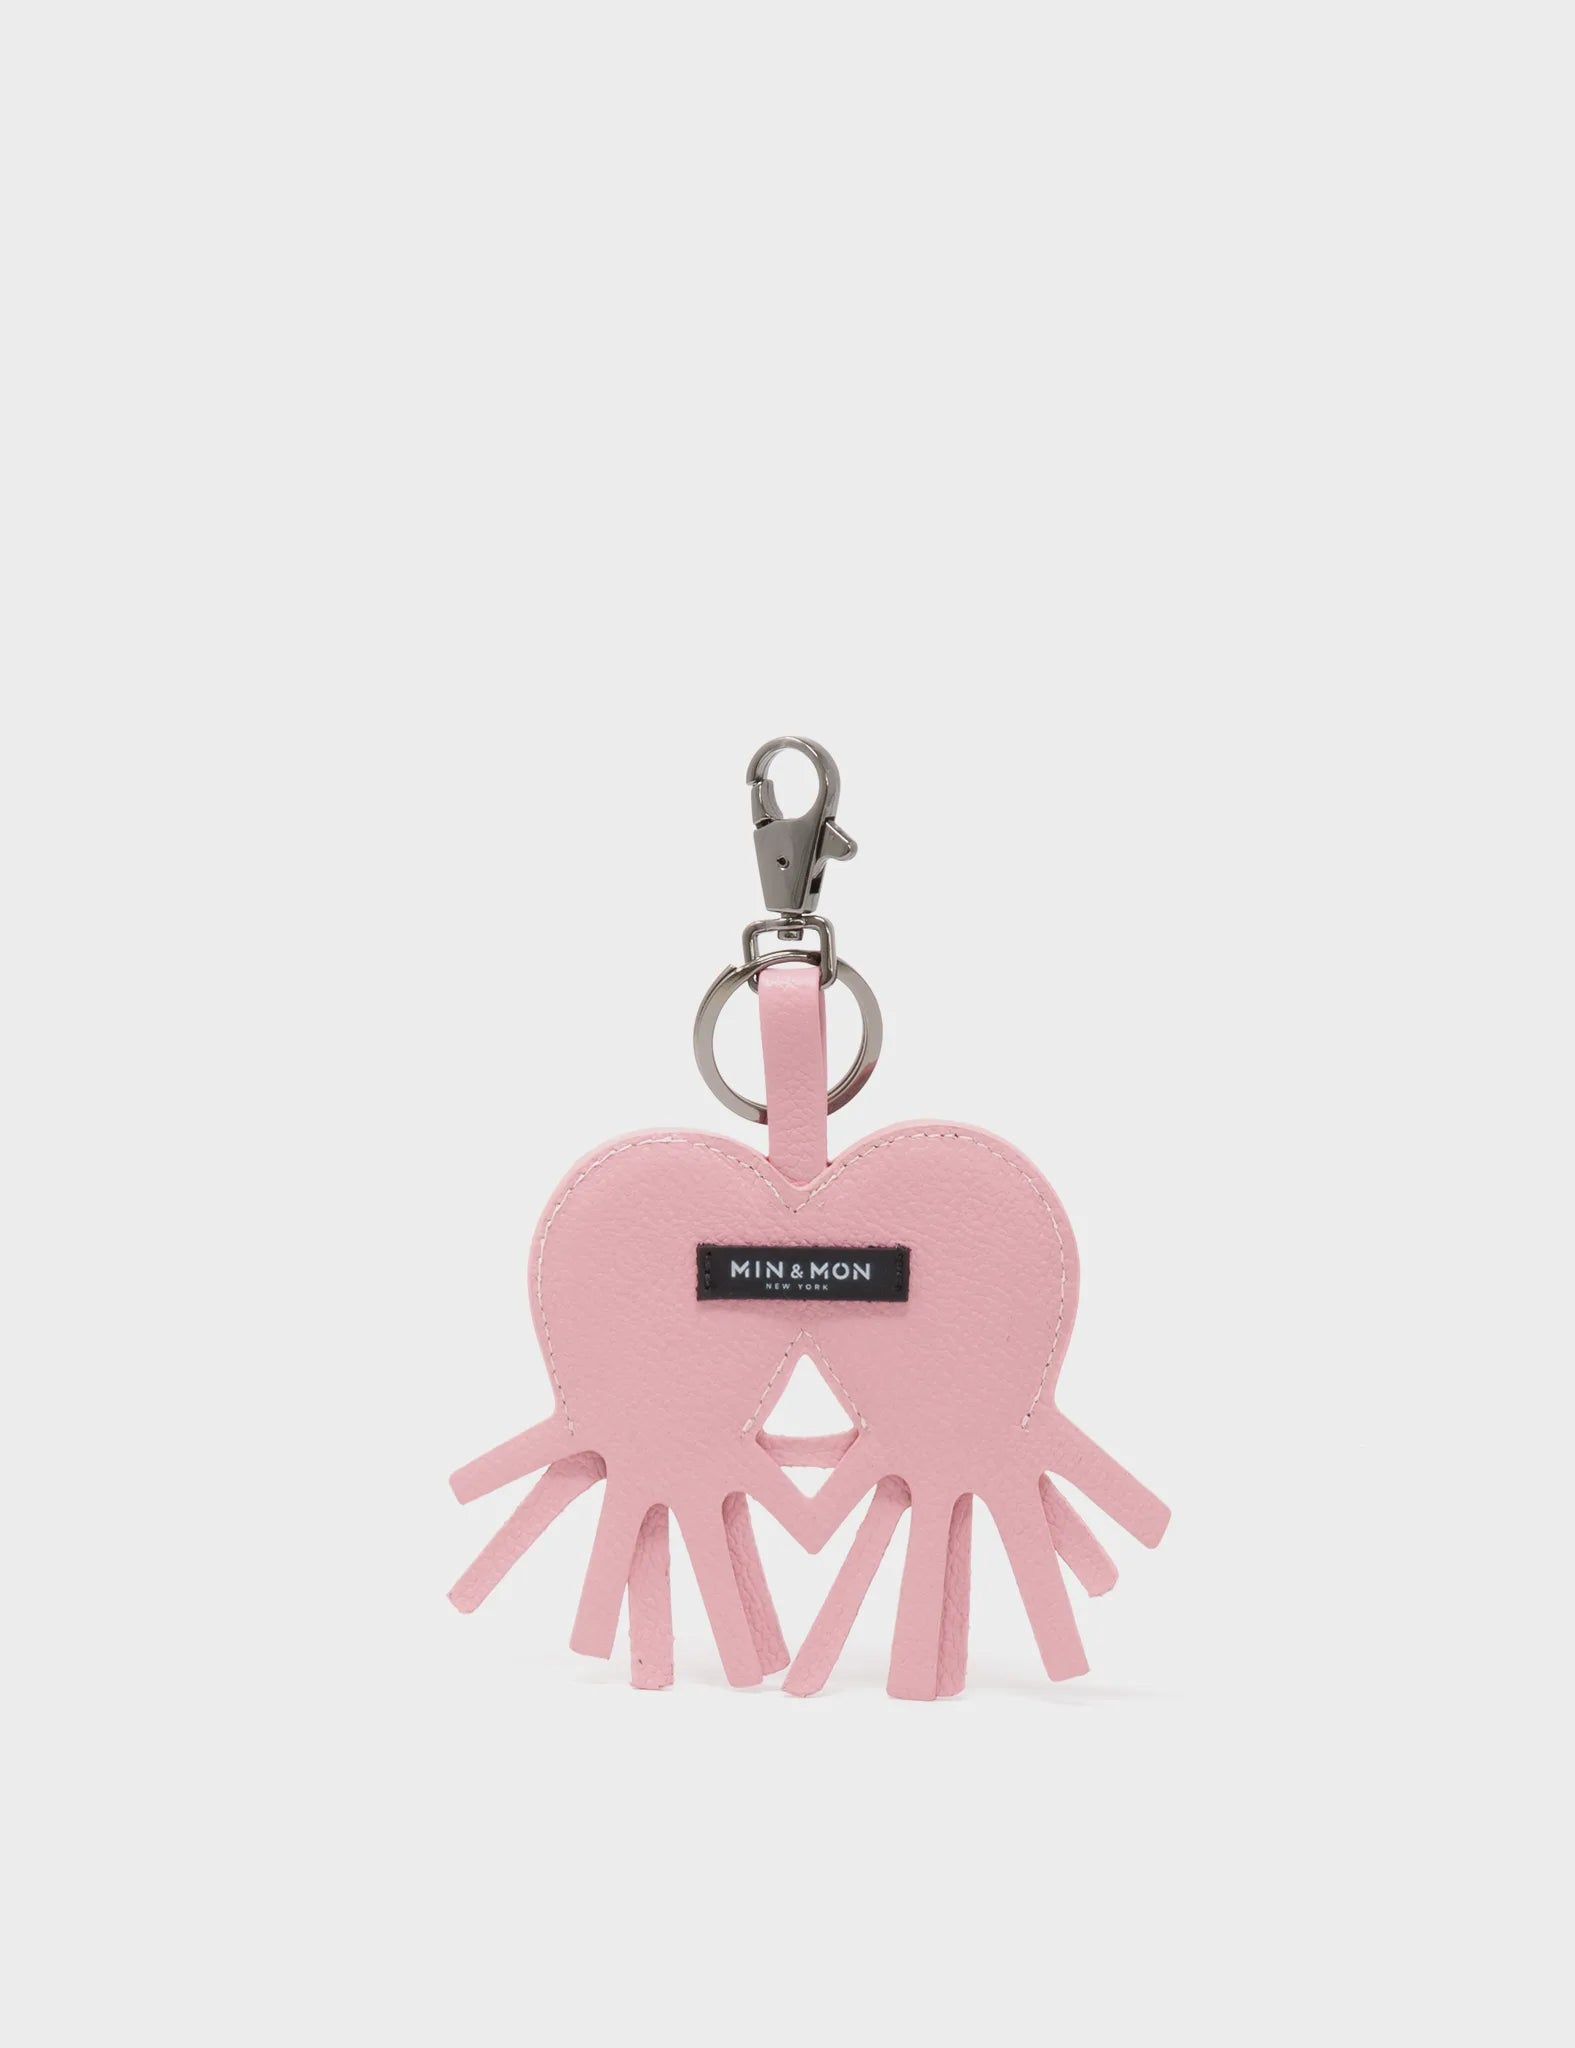 Octopus twins Charm - Blush Pink Leather Keychain - Back